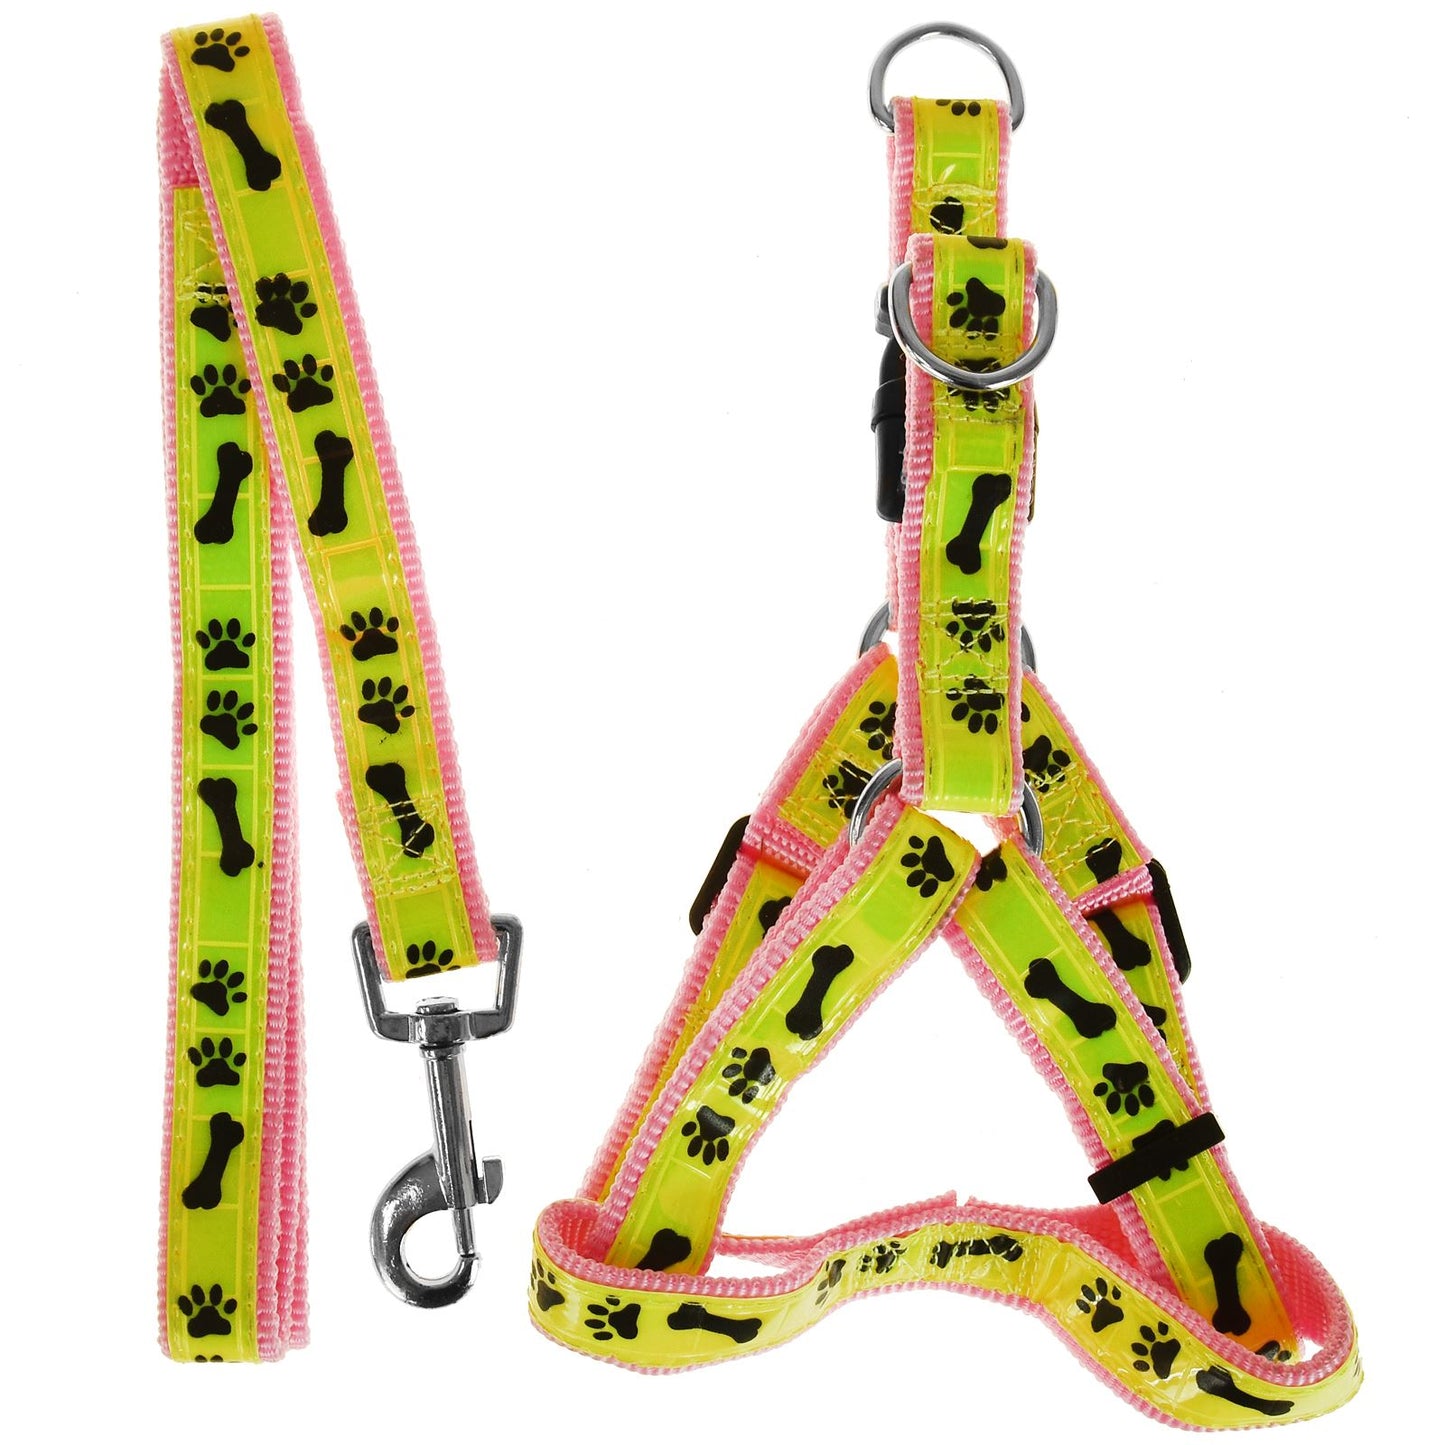 Keep Your Pet Safe with a High Visibility Harness and Lead